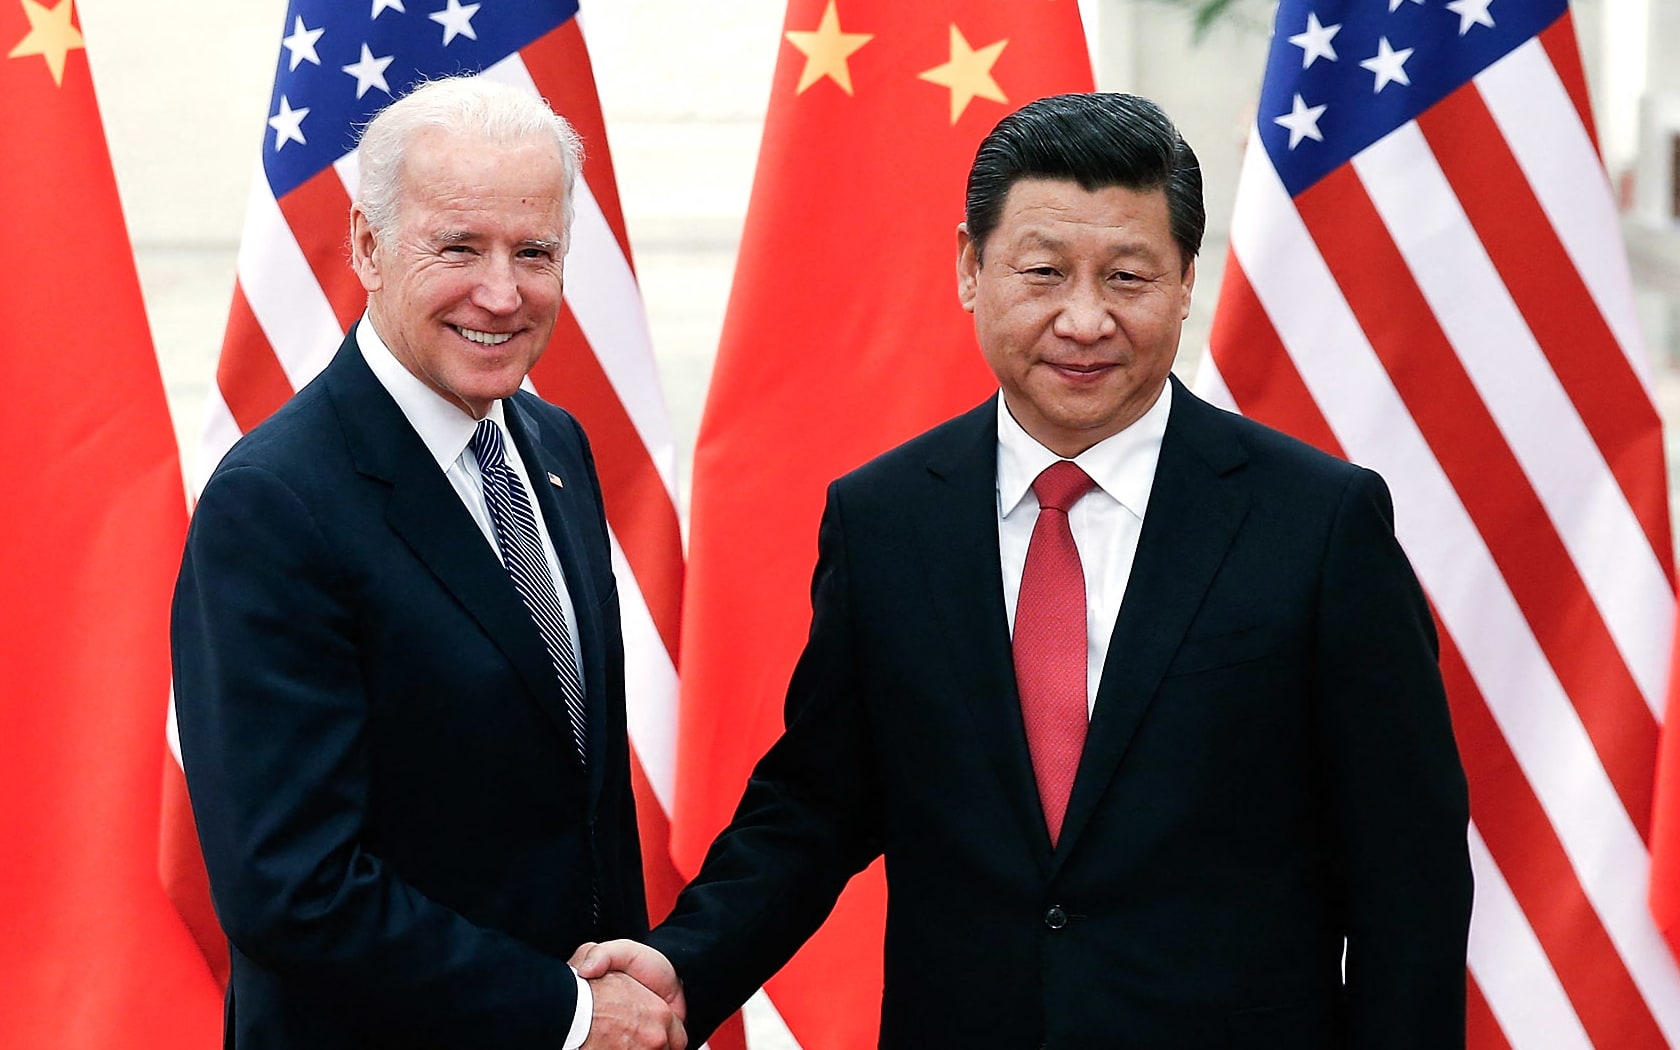 Chinese President Xi Jinping (right) shakes hands with US Vice President Joe Biden inside the Great Hall of the People in Beijing in December, 2013.